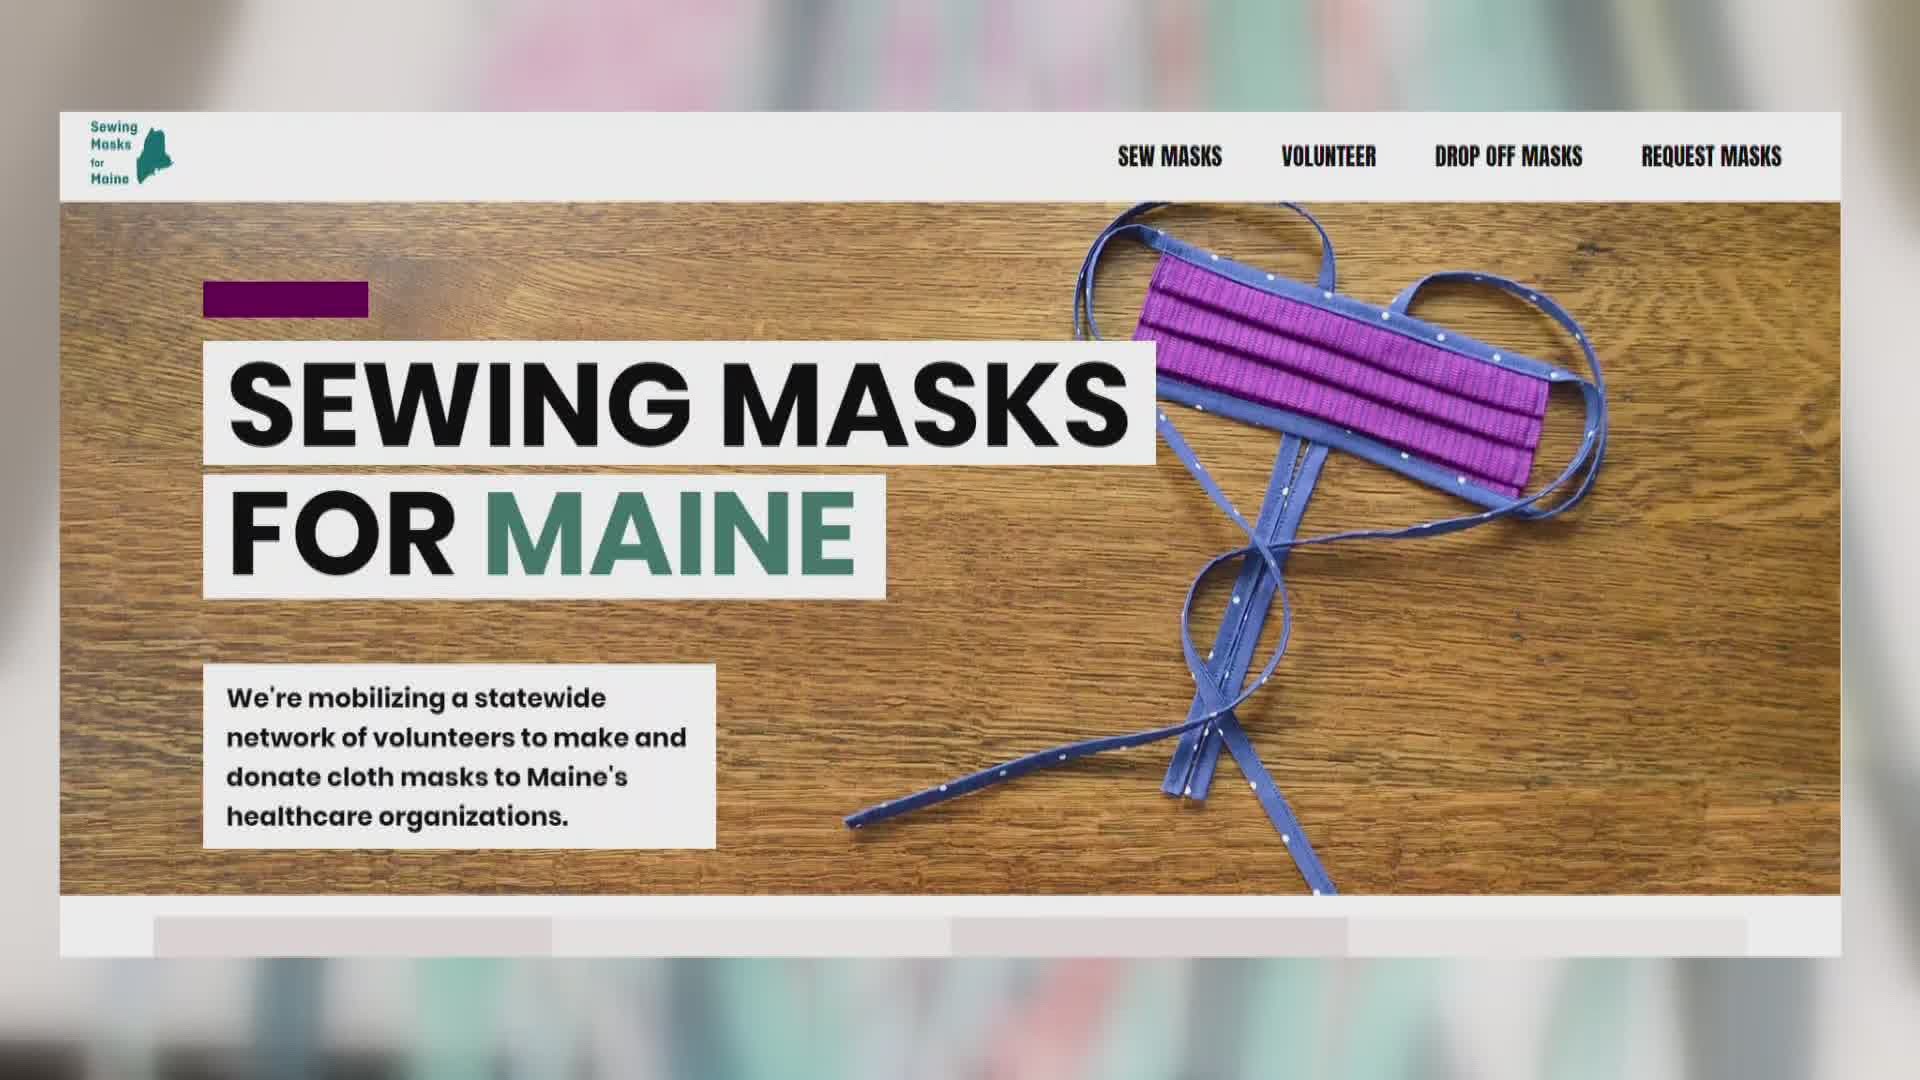 The group 'Sewing Masks for Maine' started just two weeks ago, and has drawn more than 1500 volunteers to help create masks